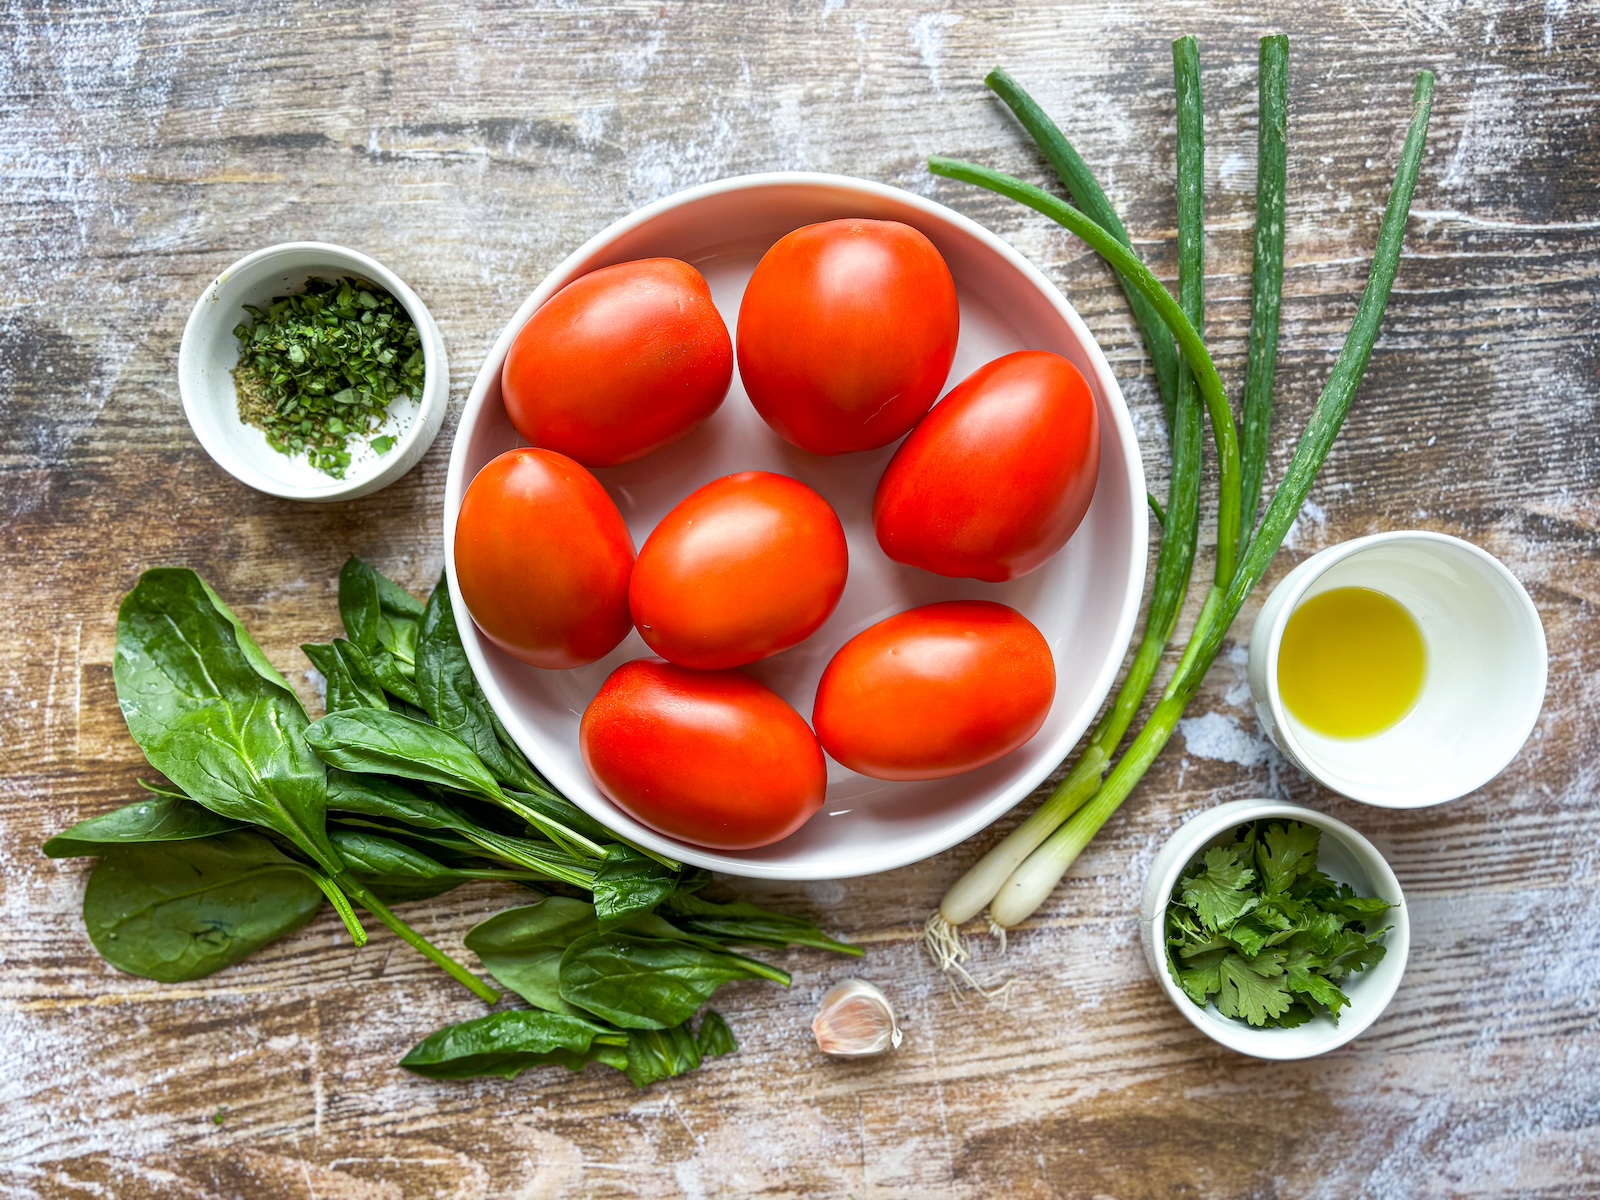 Ingredients for stuffed tomatoes on a plate.